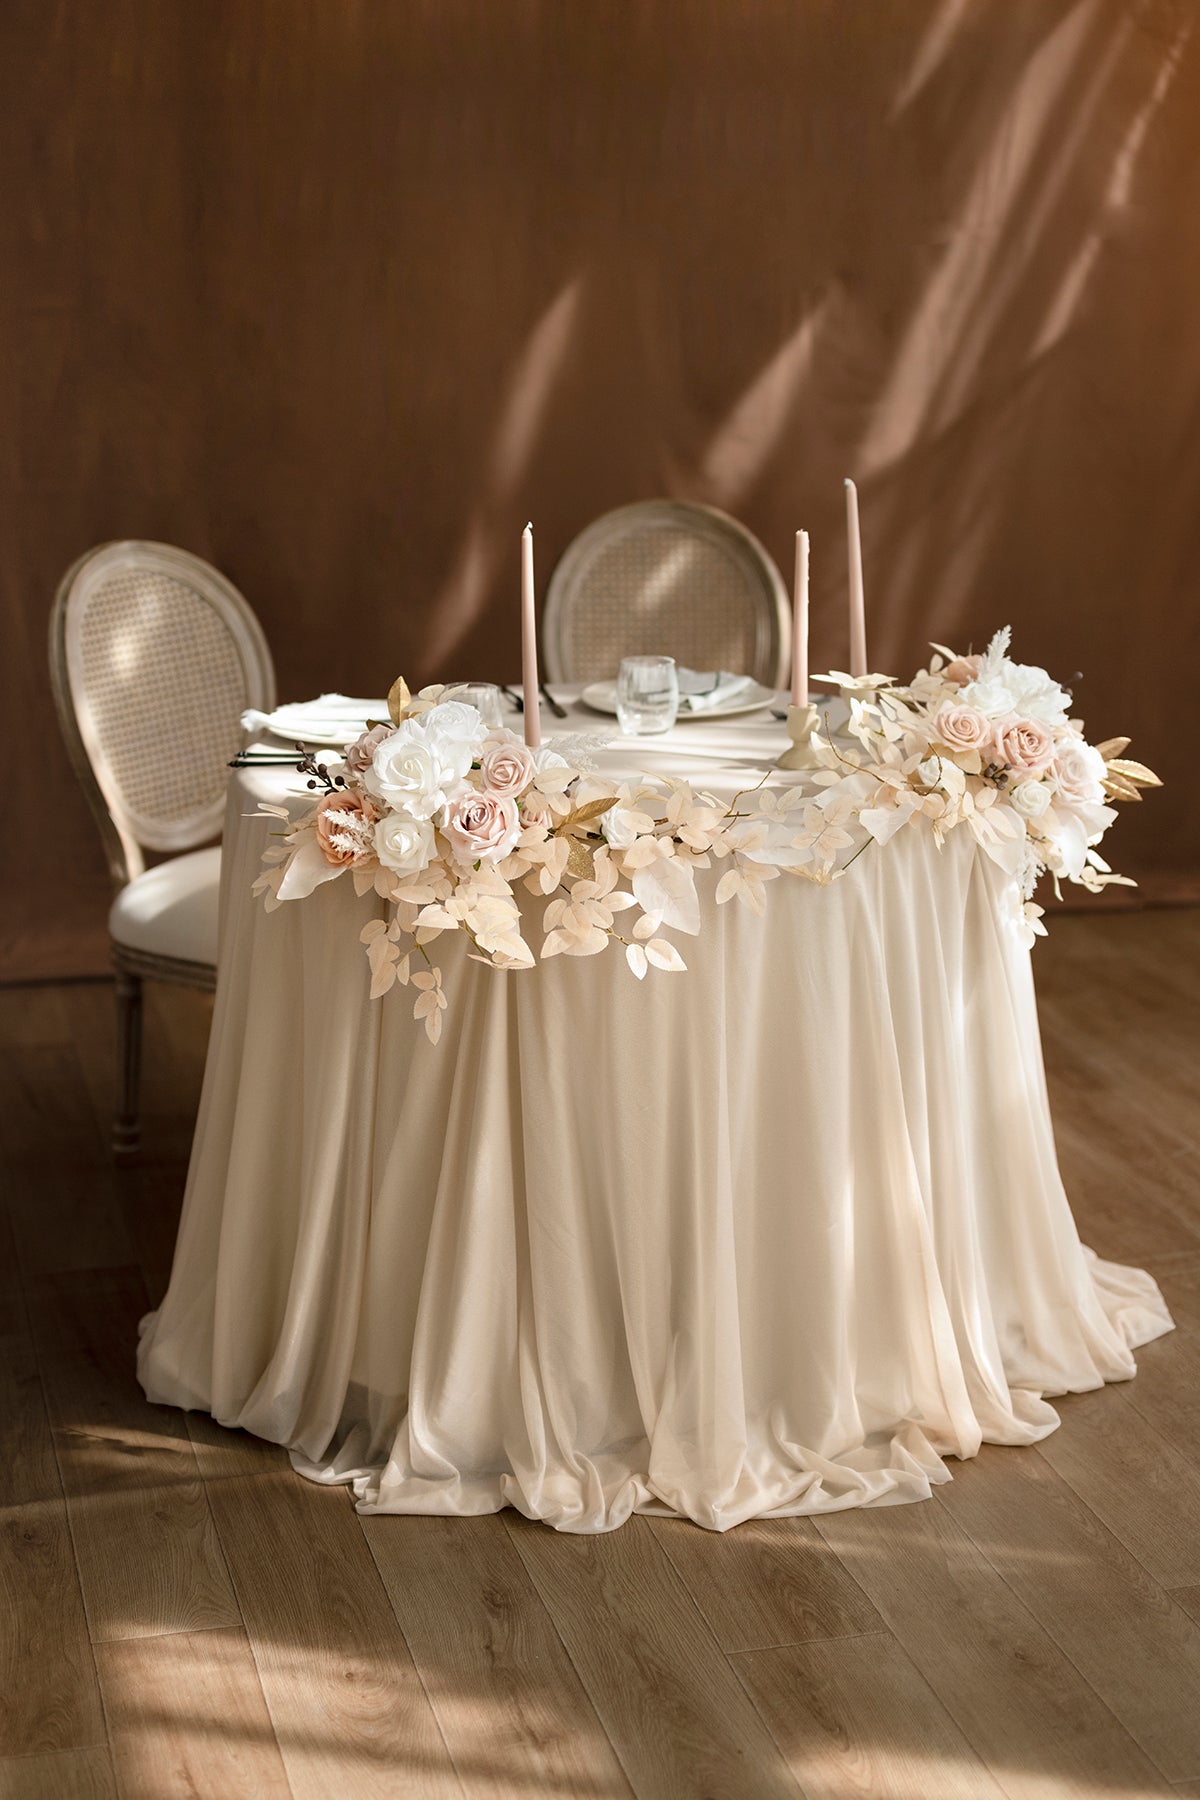 Head Table Floral Swags in White & Beige | Clearance